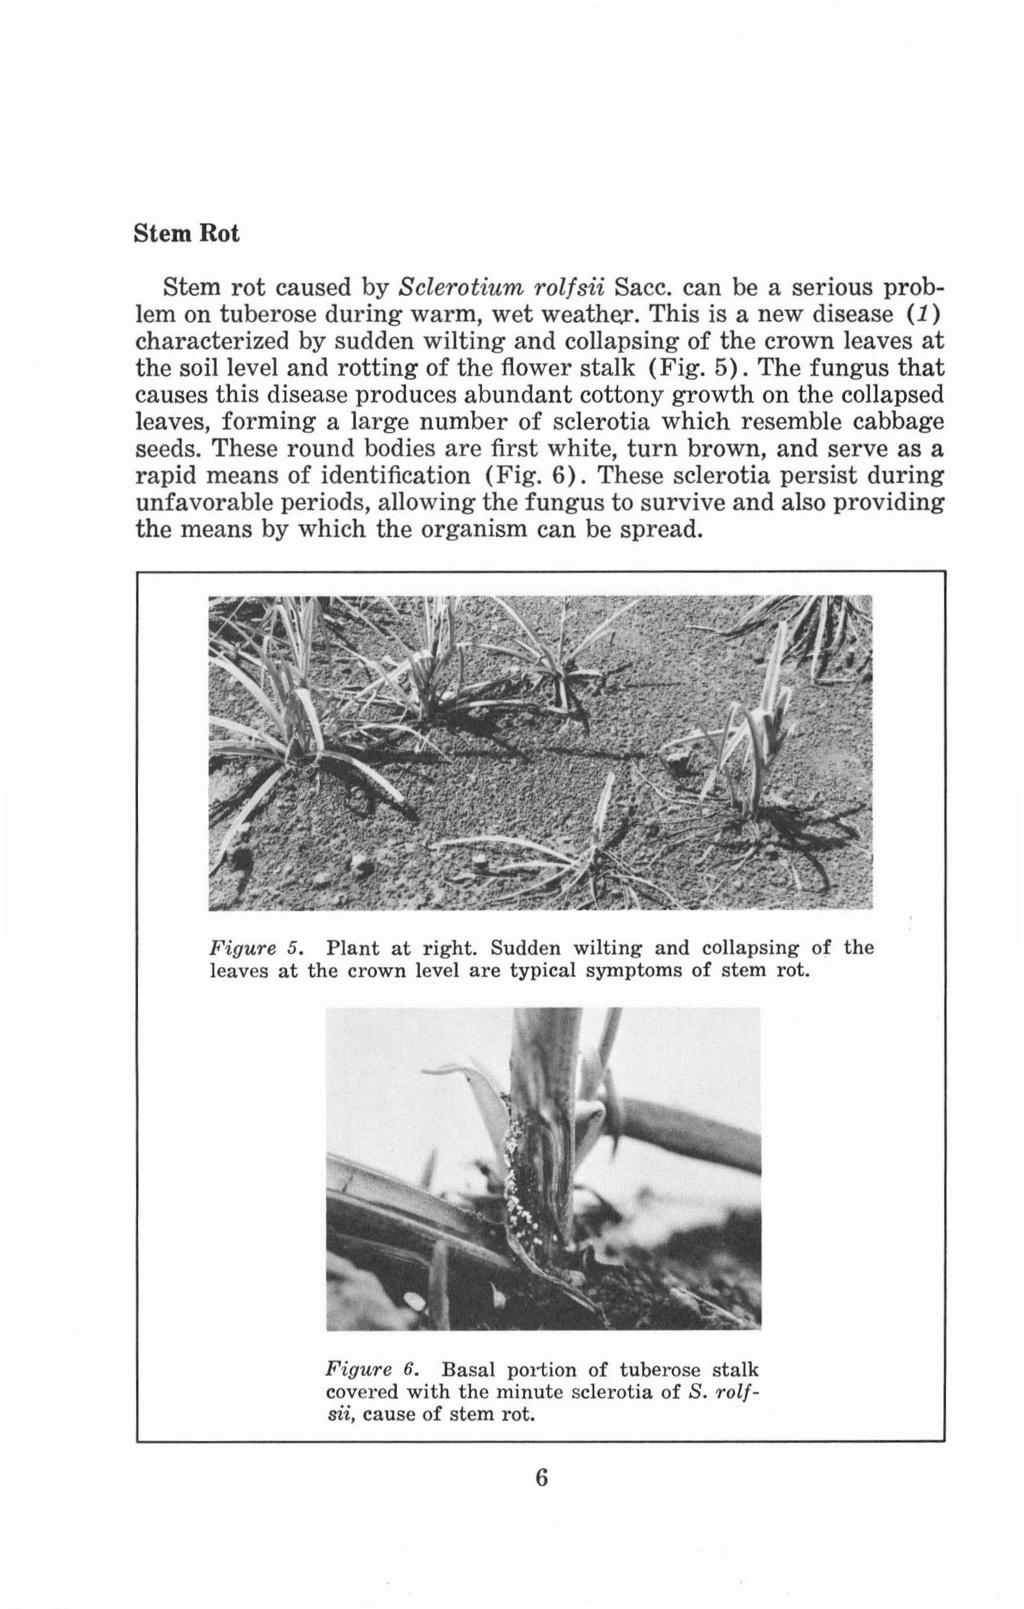 Stem Rot Stem rot caused by Sclerotium rol/sii Sacco can be a serious problem on tuberose during warm, wet weather, This is a new disease (1) characterized by sudden wilting and collapsing of the